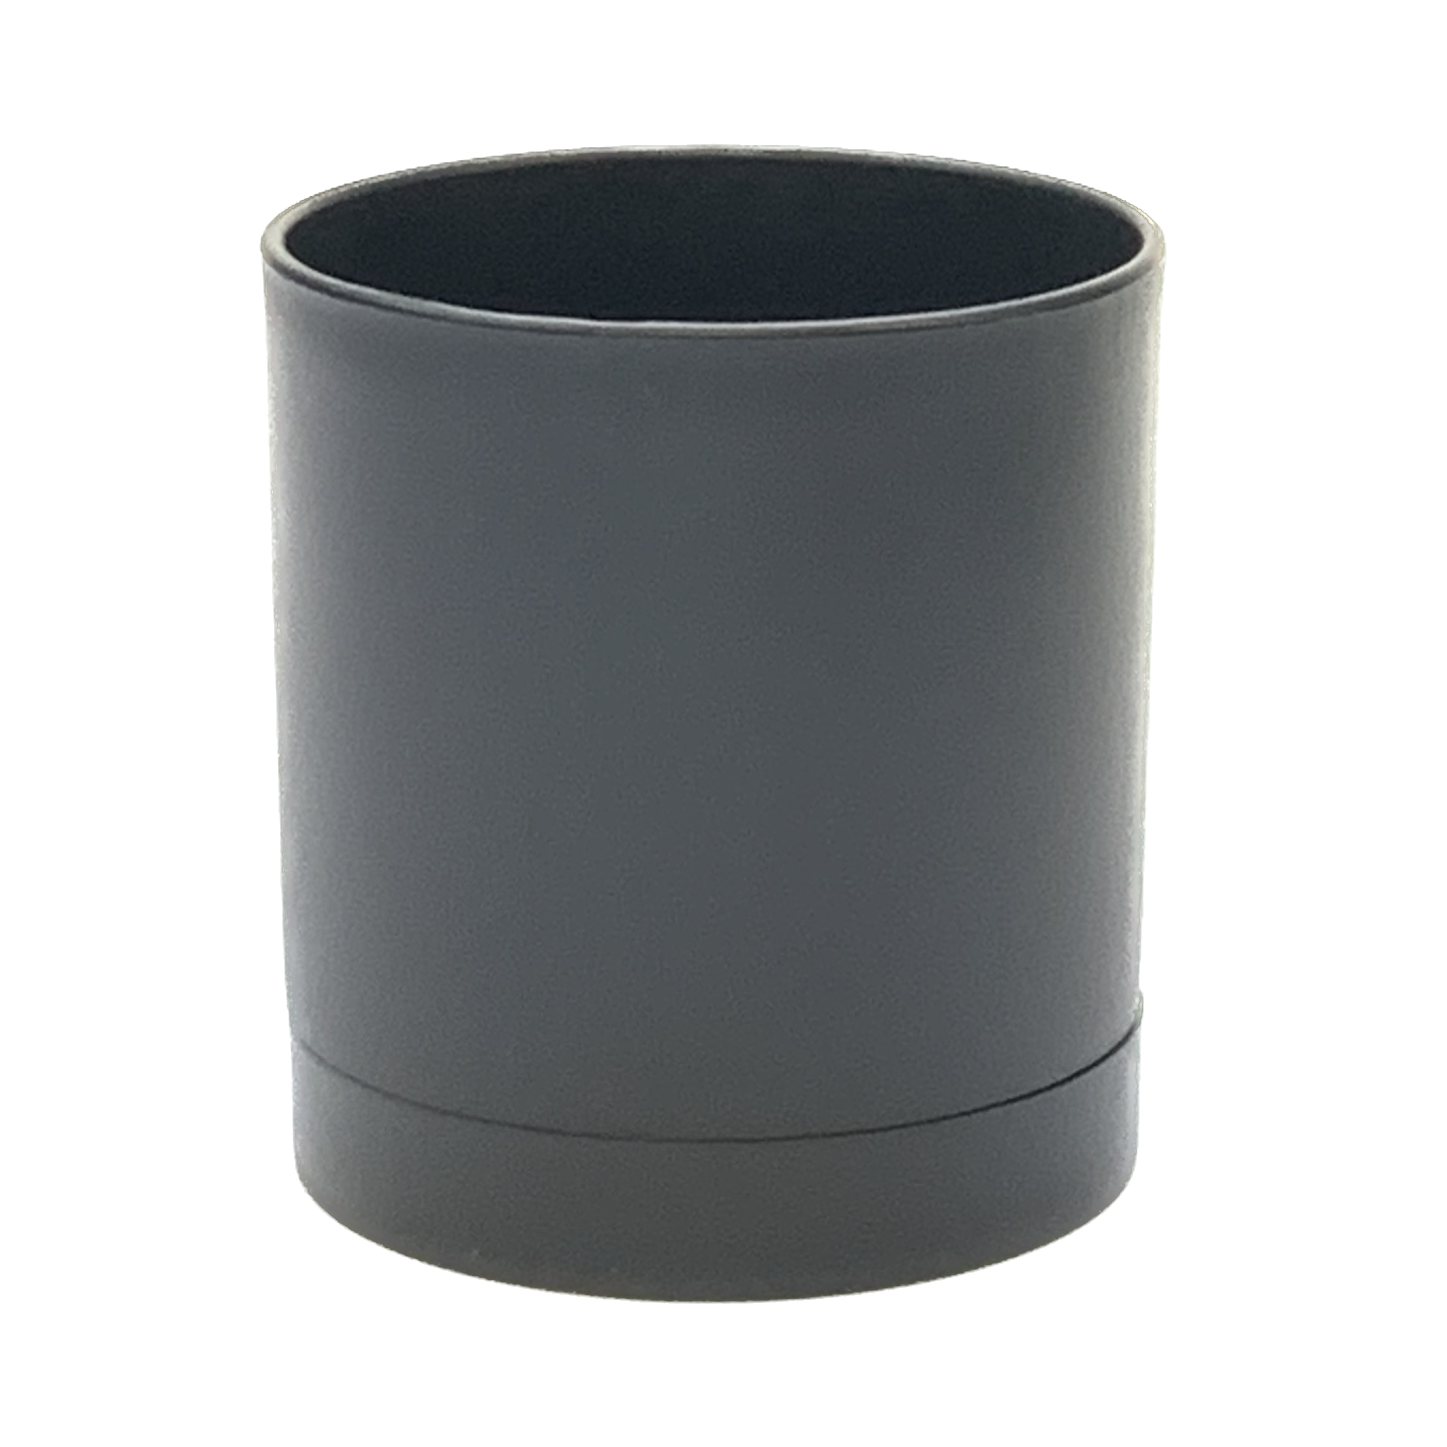 Plastic Cylinder Plant Pot with Saucer